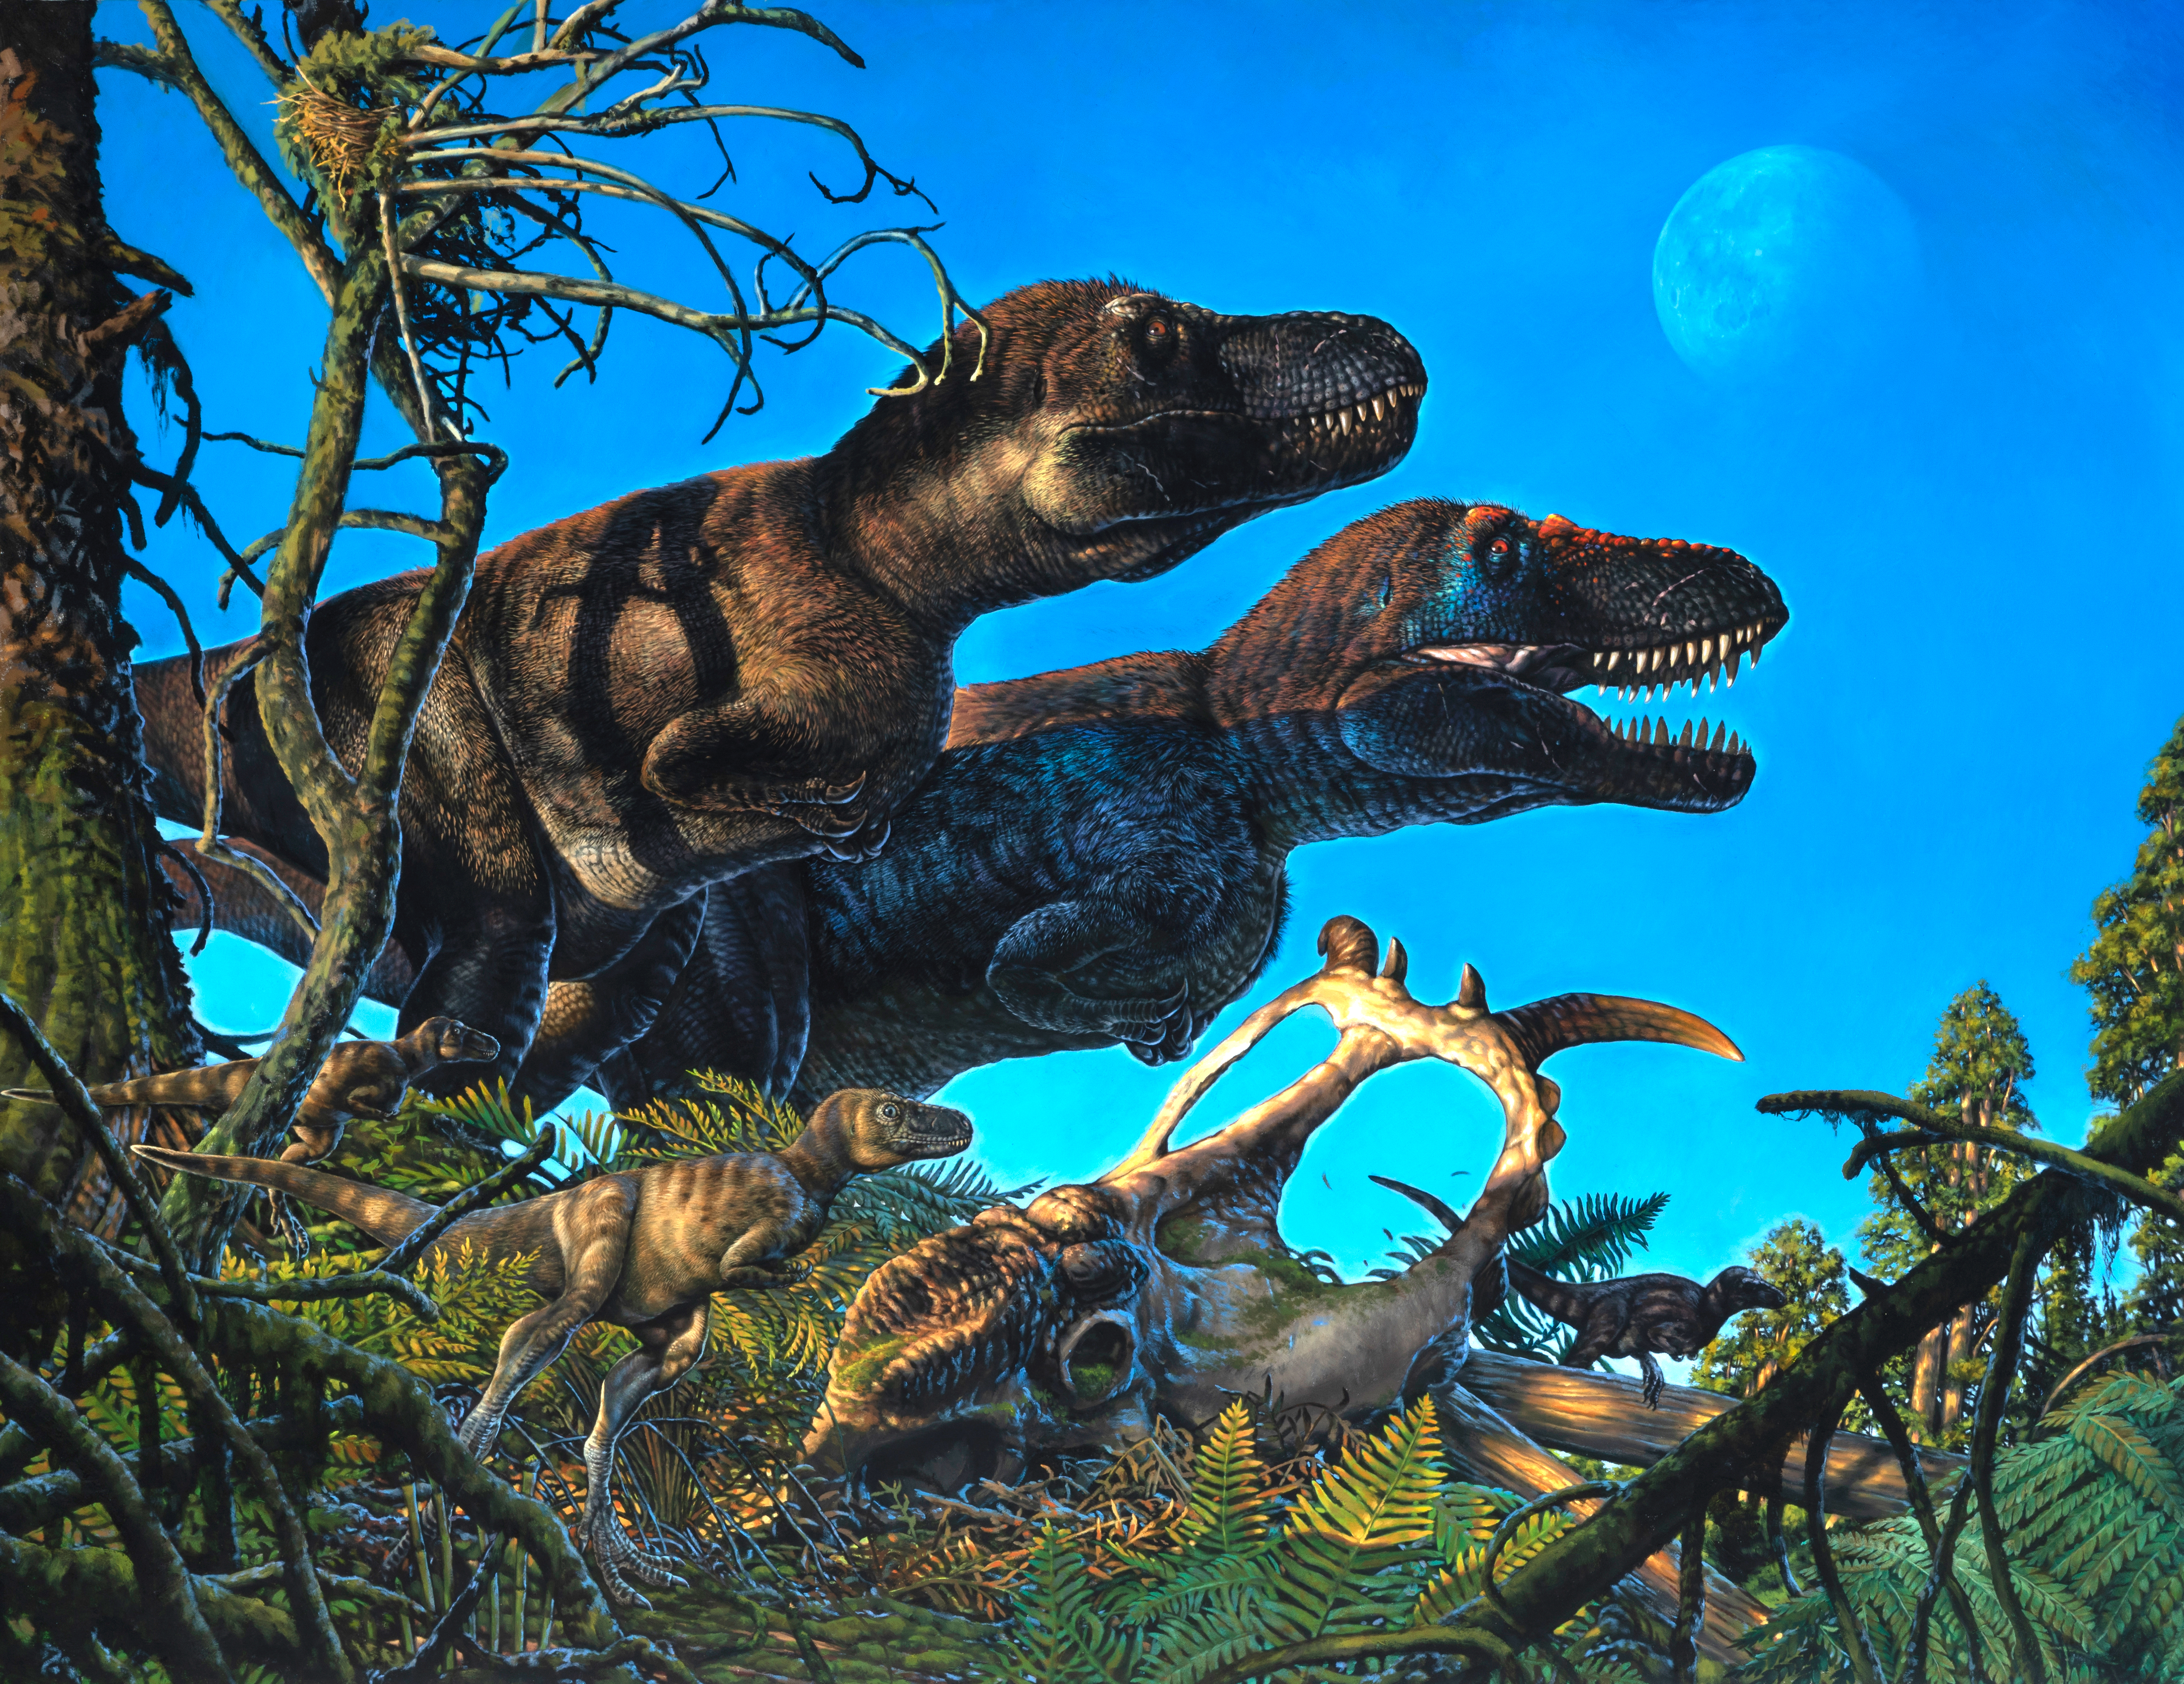 A painting of two nanuqsaurus dinosaurs with some smaller dinosaurs and the skull of a pachyrhinosaurus in the foreground.